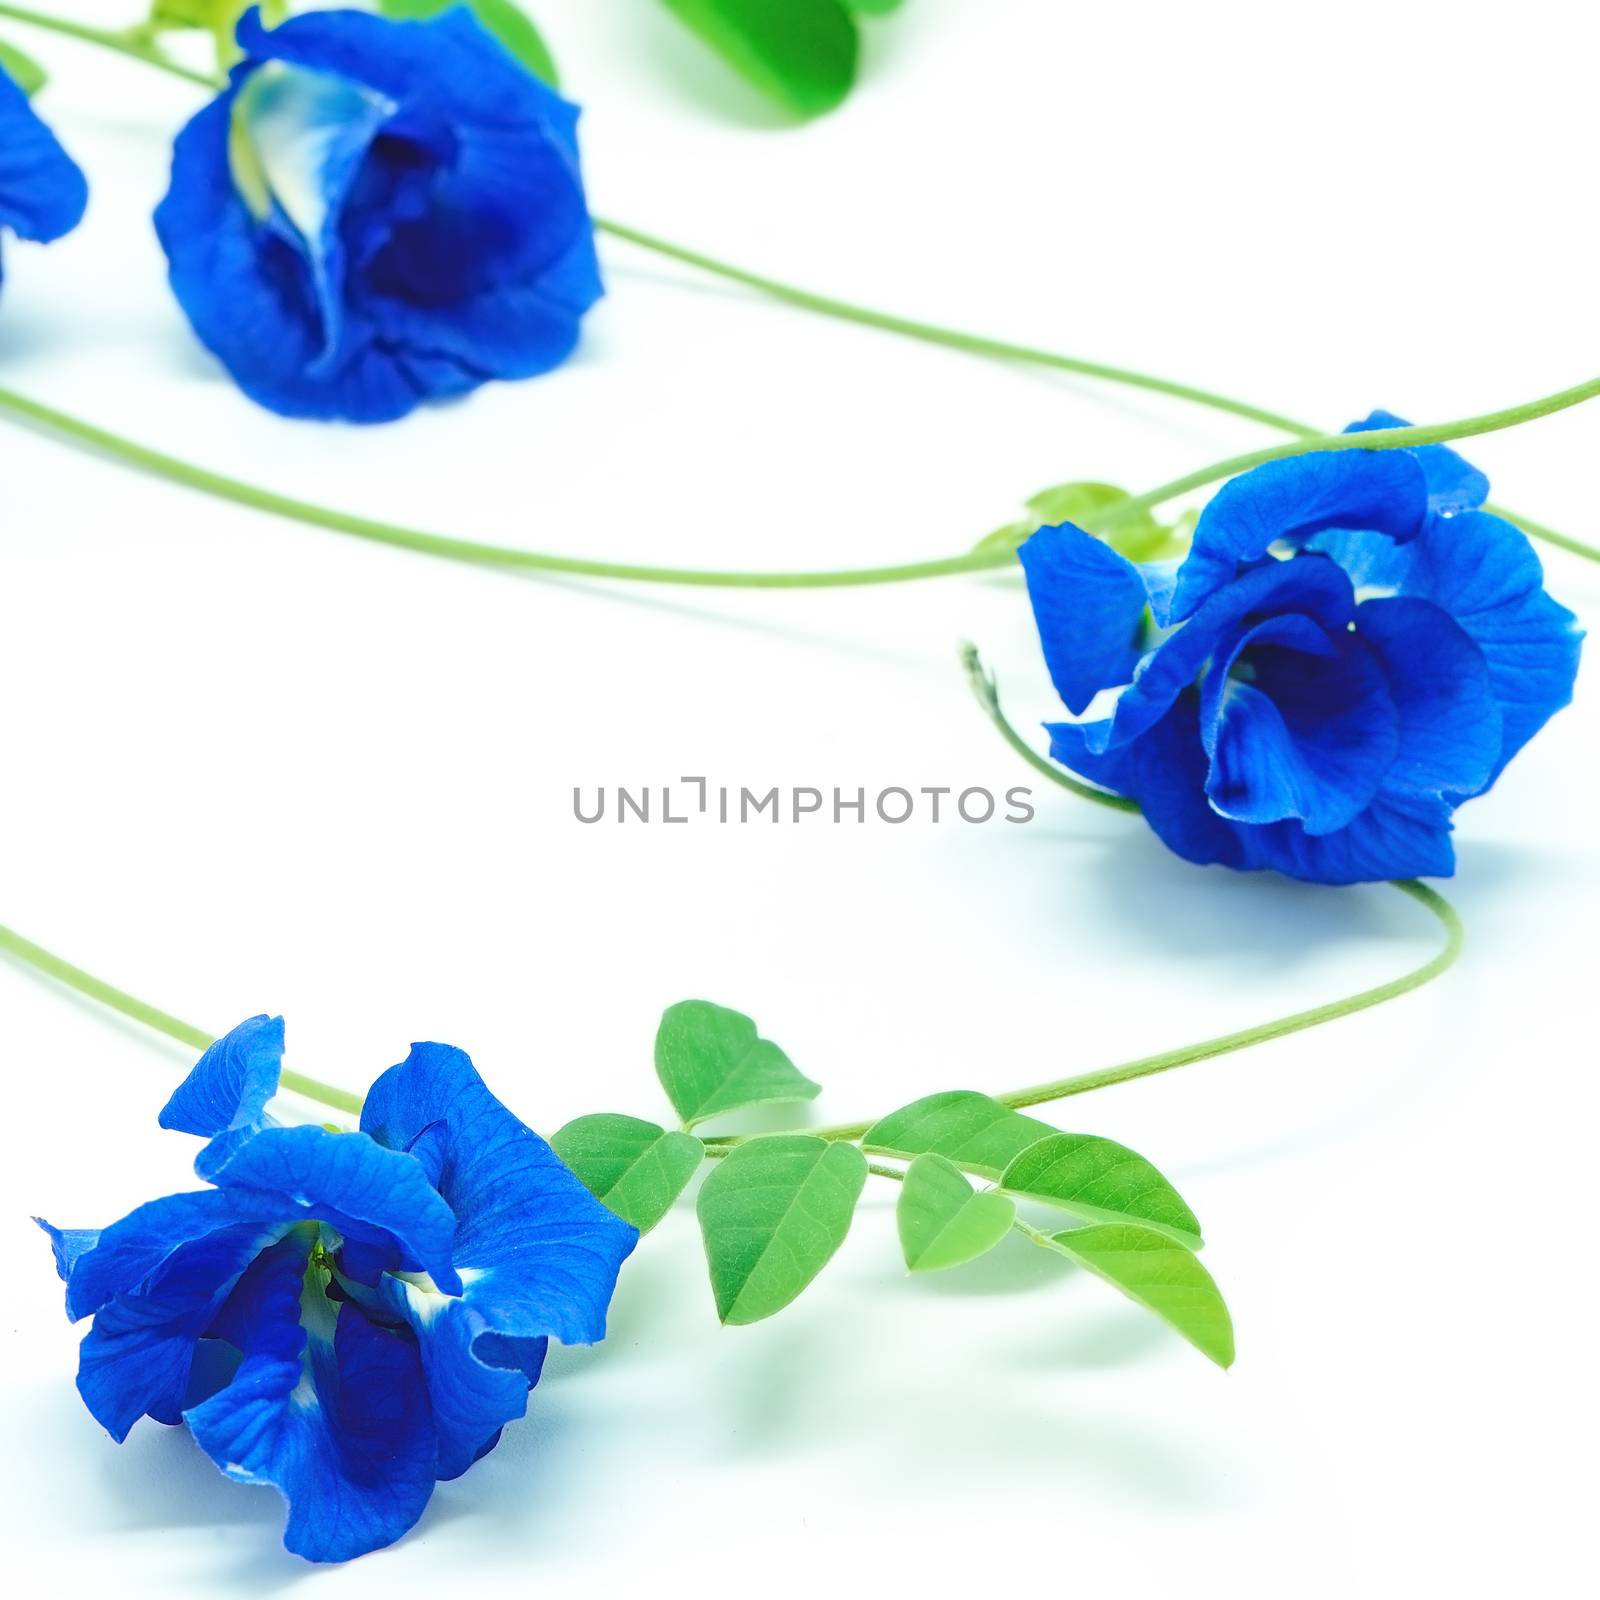 Blue Pea flower, isolated on a white background